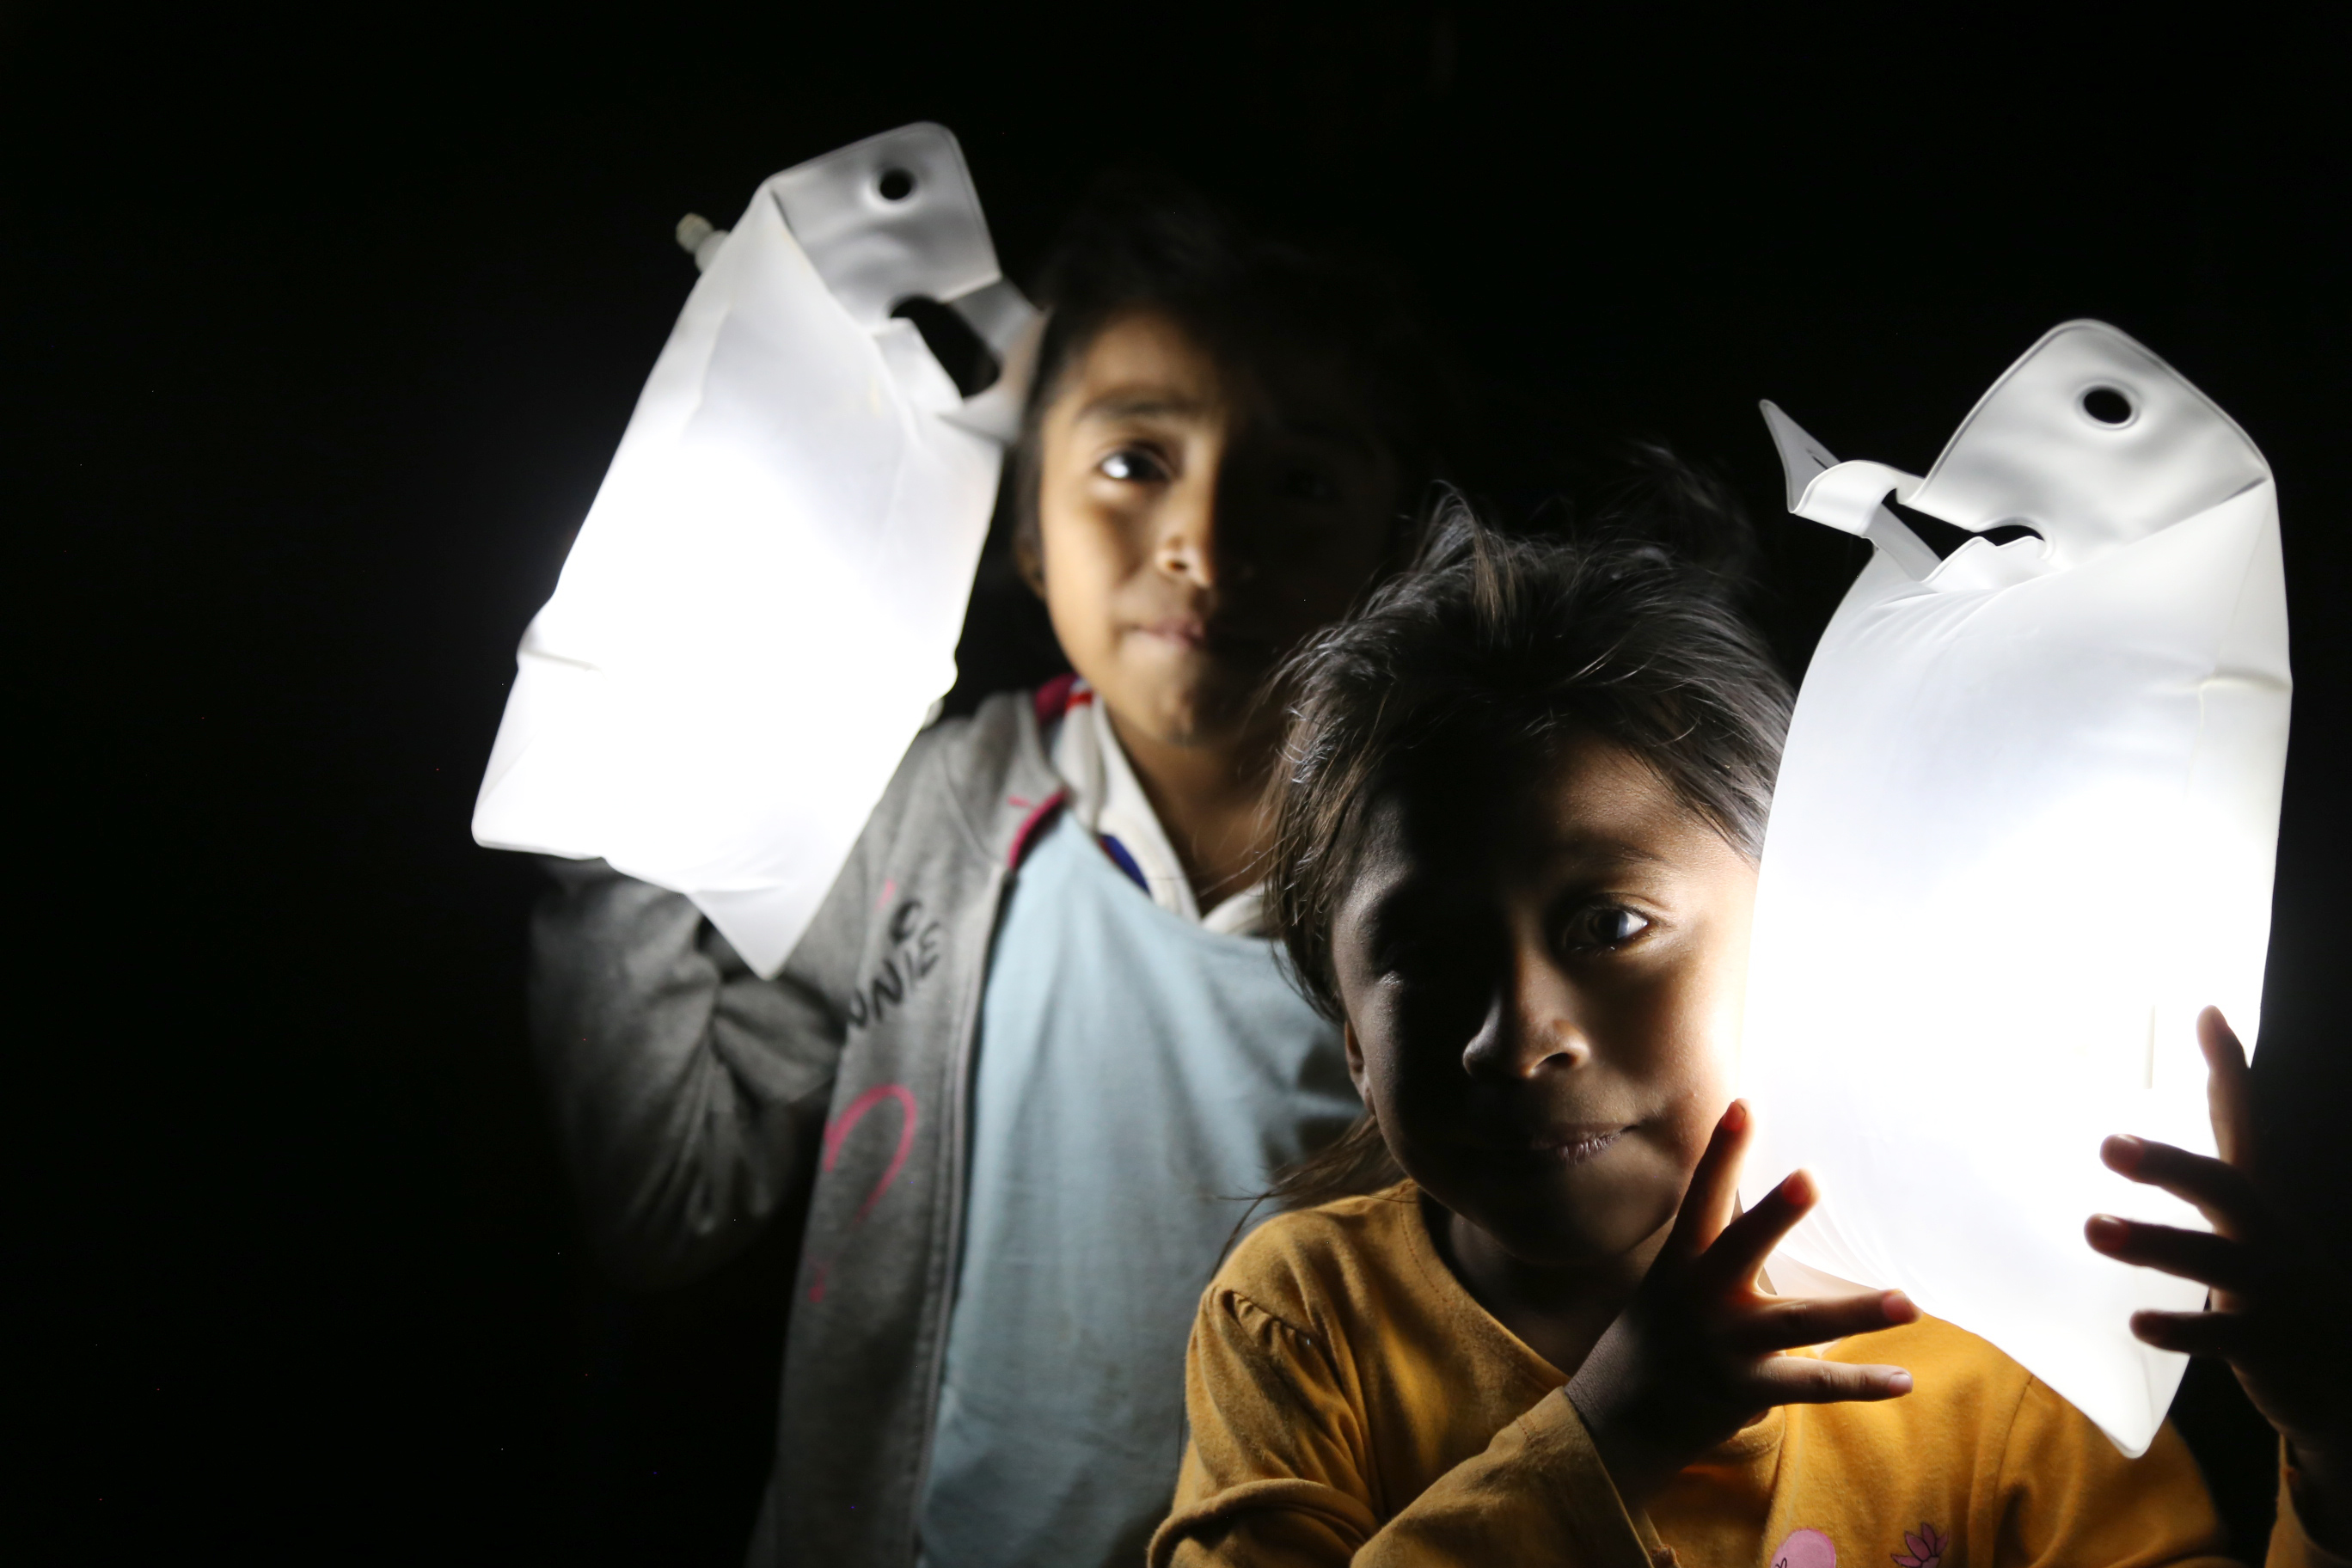 Children showing the Large size solar lights in the dark